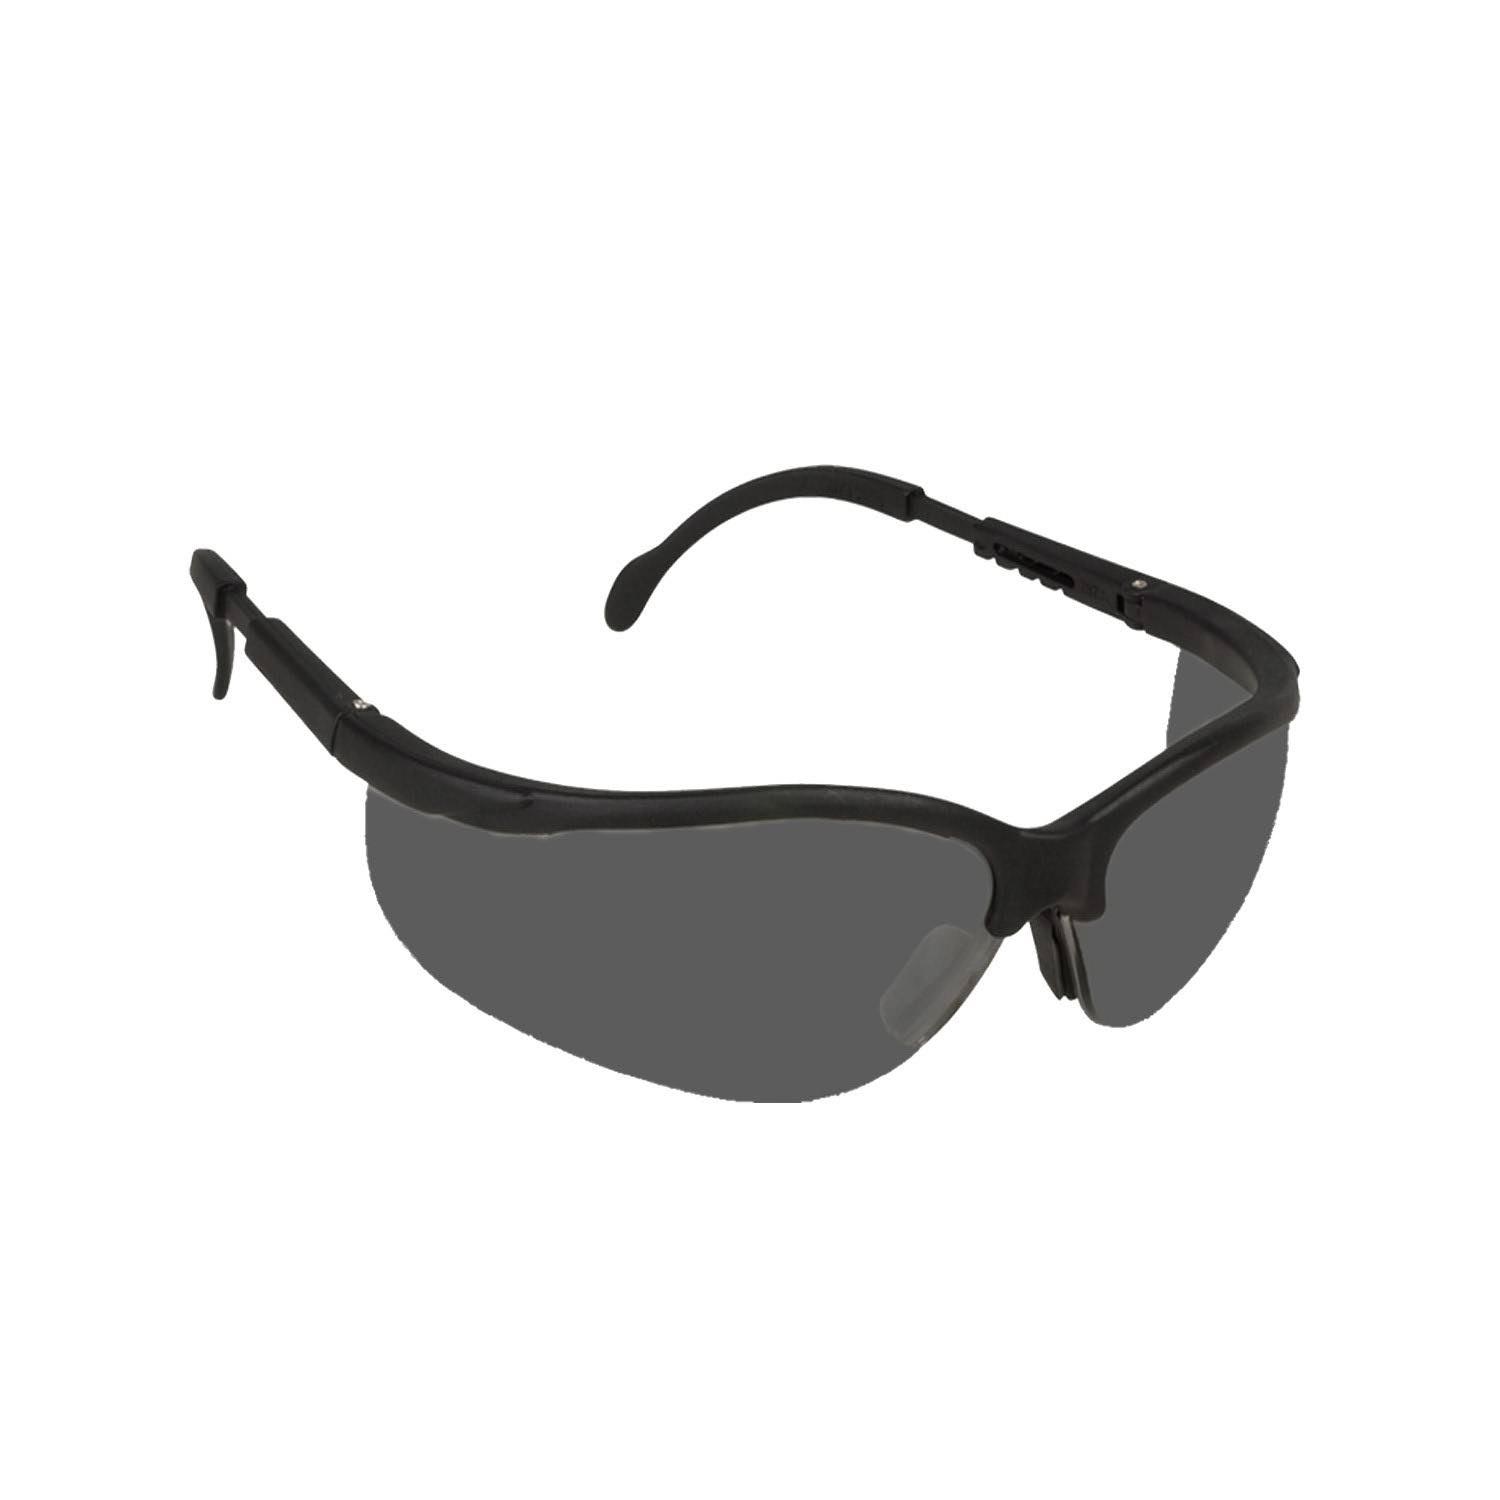 Cordova Safety Products EKB20S Boxer Scratch-Resistant Polycarbonate Lens with Black Nylon Frame, Gray